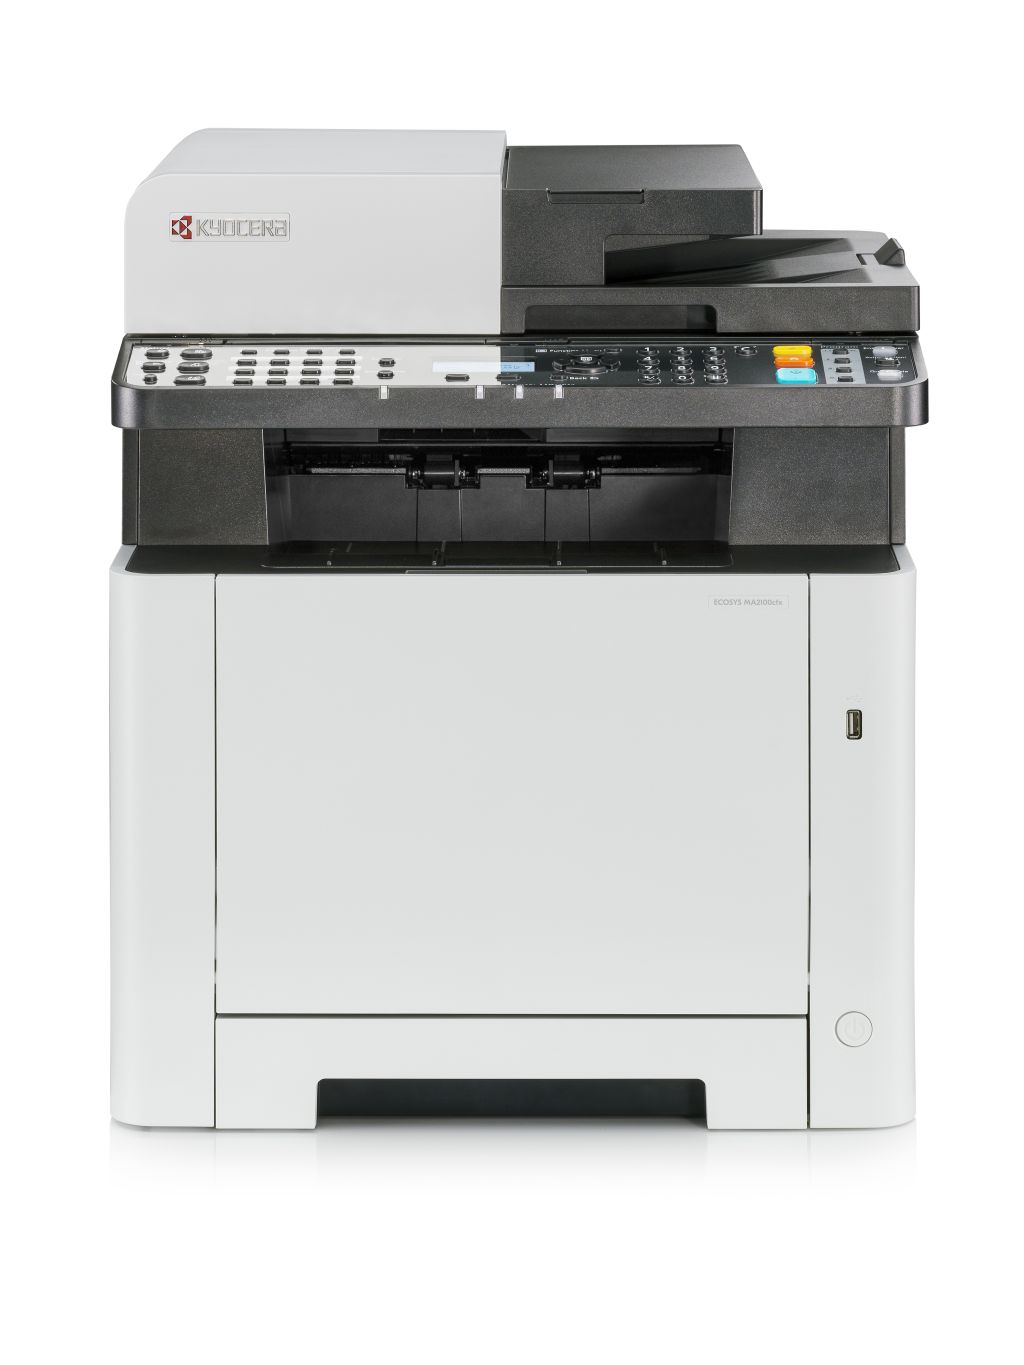 KYOCERA ECOSYS MA2100cfx/Plus A4 21ppm Color Multifunction Printer